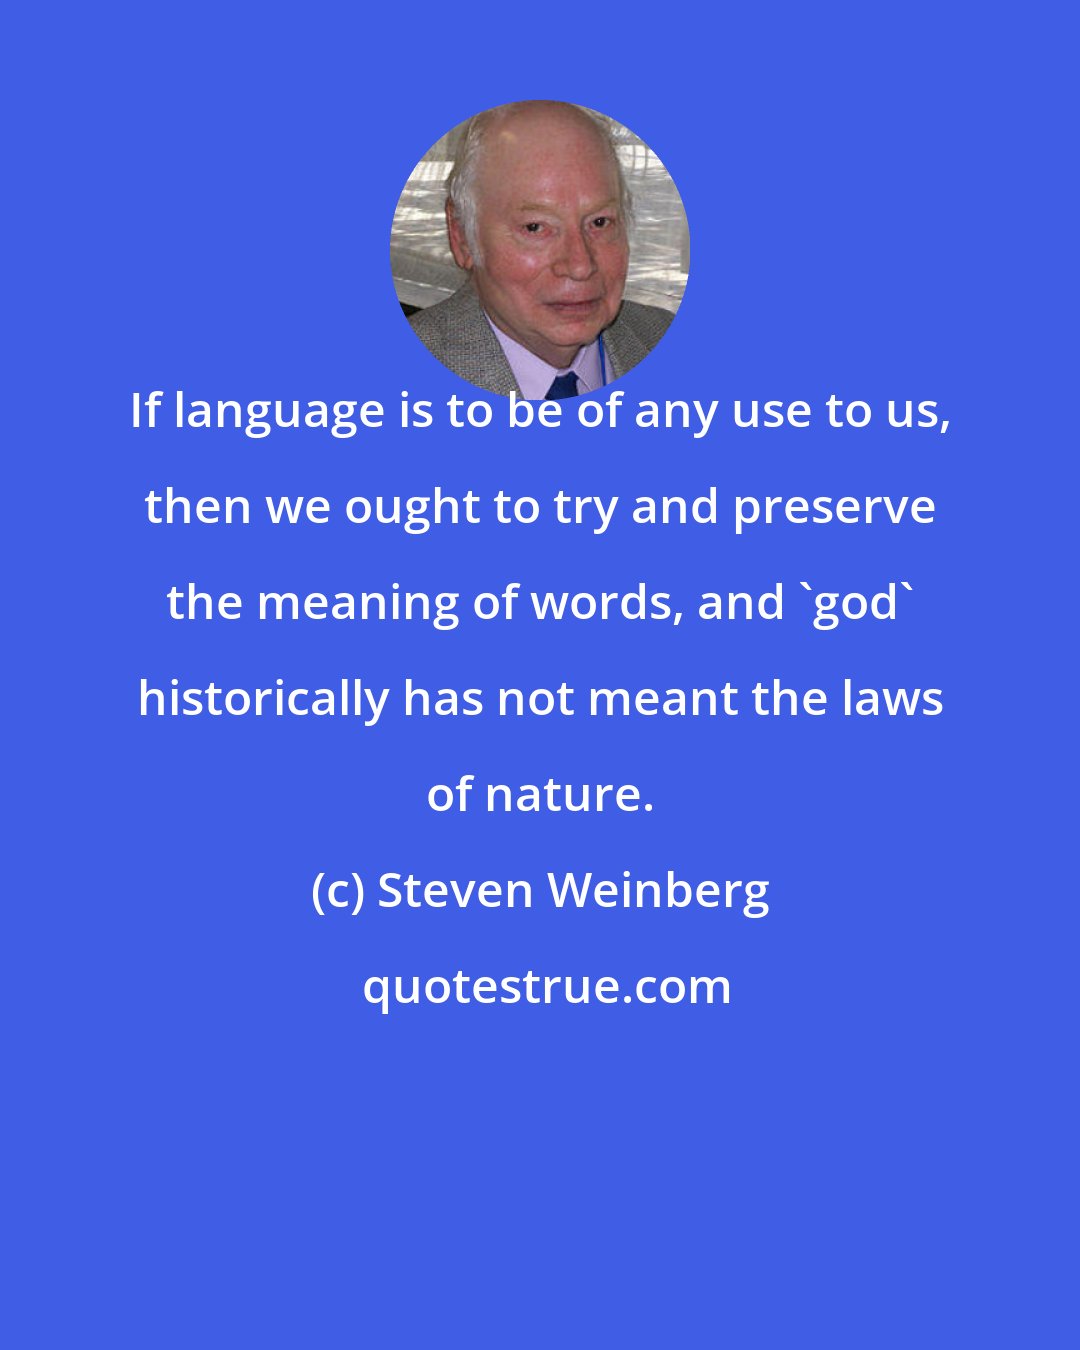 Steven Weinberg: If language is to be of any use to us, then we ought to try and preserve the meaning of words, and 'god' historically has not meant the laws of nature.